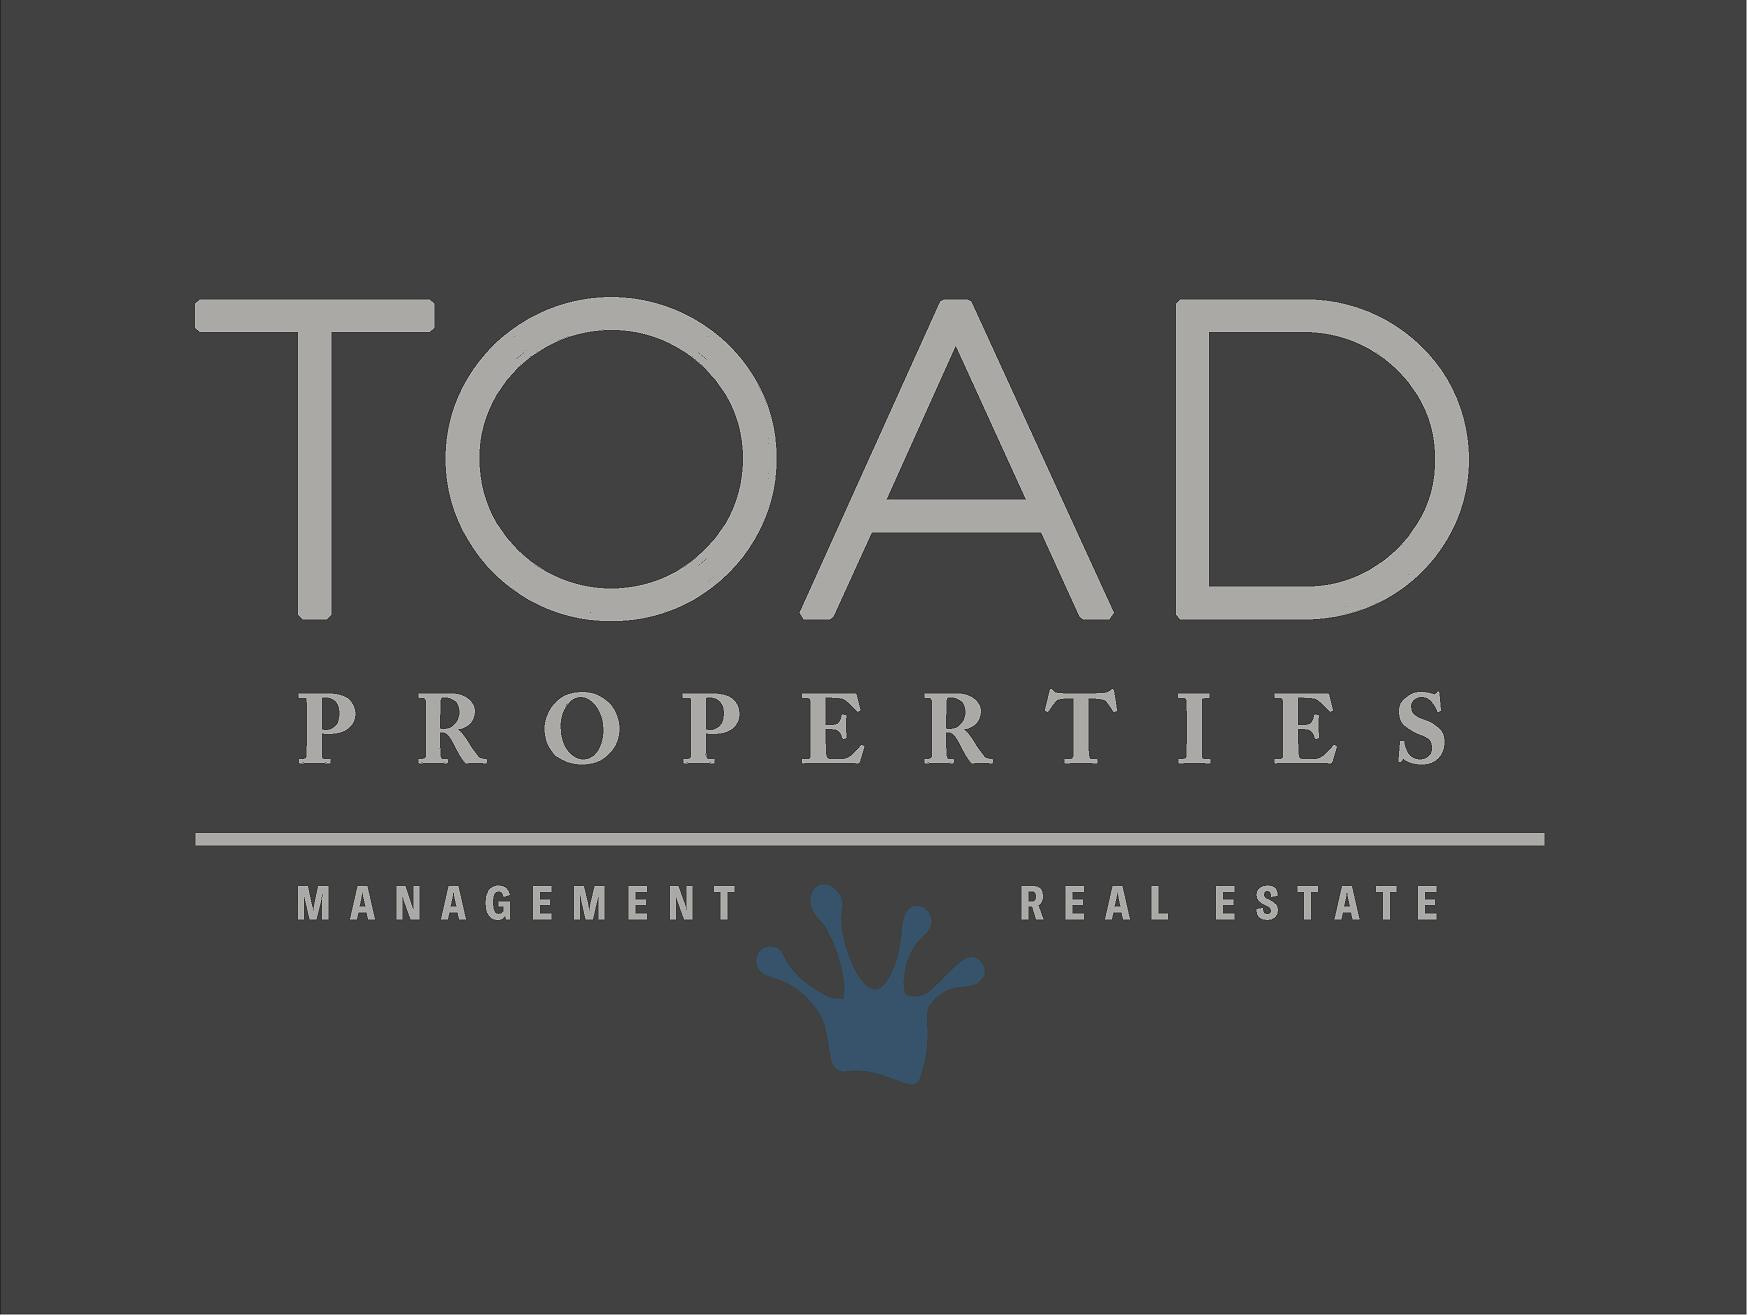 Toad Properties, Management and Real Estate 318 Elk Ave # 10, Crested Butte Colorado 81224